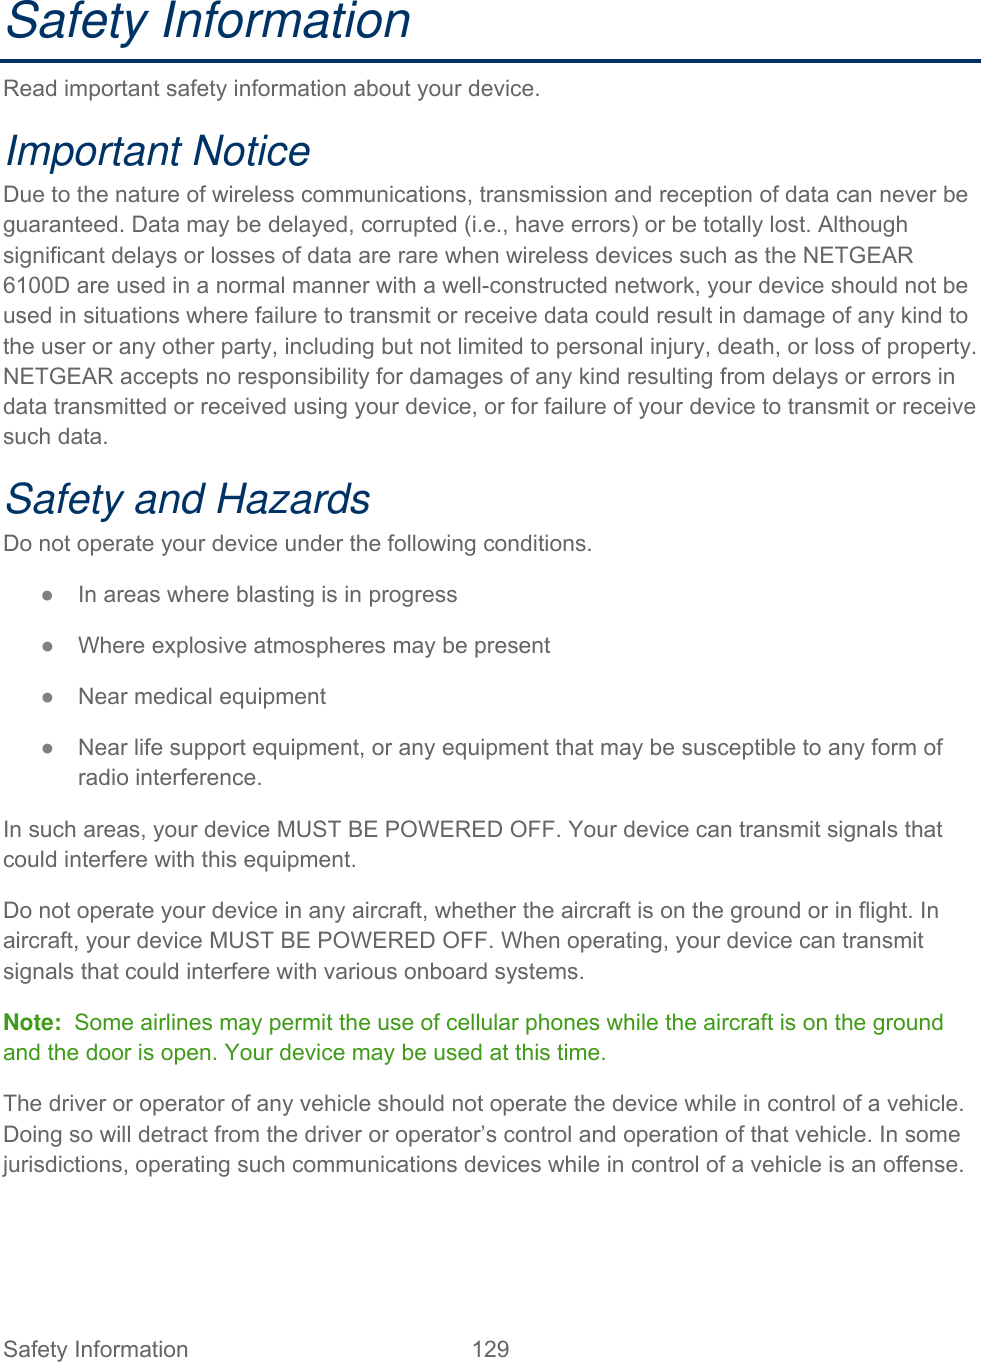 Safety Information  129   Safety Information Read important safety information about your device. Important Notice Due to the nature of wireless communications, transmission and reception of data can never be guaranteed. Data may be delayed, corrupted (i.e., have errors) or be totally lost. Although significant delays or losses of data are rare when wireless devices such as the NETGEAR 6100D are used in a normal manner with a well-constructed network, your device should not be used in situations where failure to transmit or receive data could result in damage of any kind to the user or any other party, including but not limited to personal injury, death, or loss of property. NETGEAR accepts no responsibility for damages of any kind resulting from delays or errors in data transmitted or received using your device, or for failure of your device to transmit or receive such data. Safety and Hazards Do not operate your device under the following conditions. ● In areas where blasting is in progress ● Where explosive atmospheres may be present ● Near medical equipment ● Near life support equipment, or any equipment that may be susceptible to any form of radio interference. In such areas, your device MUST BE POWERED OFF. Your device can transmit signals that could interfere with this equipment. Do not operate your device in any aircraft, whether the aircraft is on the ground or in flight. In aircraft, your device MUST BE POWERED OFF. When operating, your device can transmit signals that could interfere with various onboard systems. Note:  Some airlines may permit the use of cellular phones while the aircraft is on the ground and the door is open. Your device may be used at this time. The driver or operator of any vehicle should not operate the device while in control of a vehicle. Doing so will detract from the driver or operator’s control and operation of that vehicle. In some jurisdictions, operating such communications devices while in control of a vehicle is an offense.  